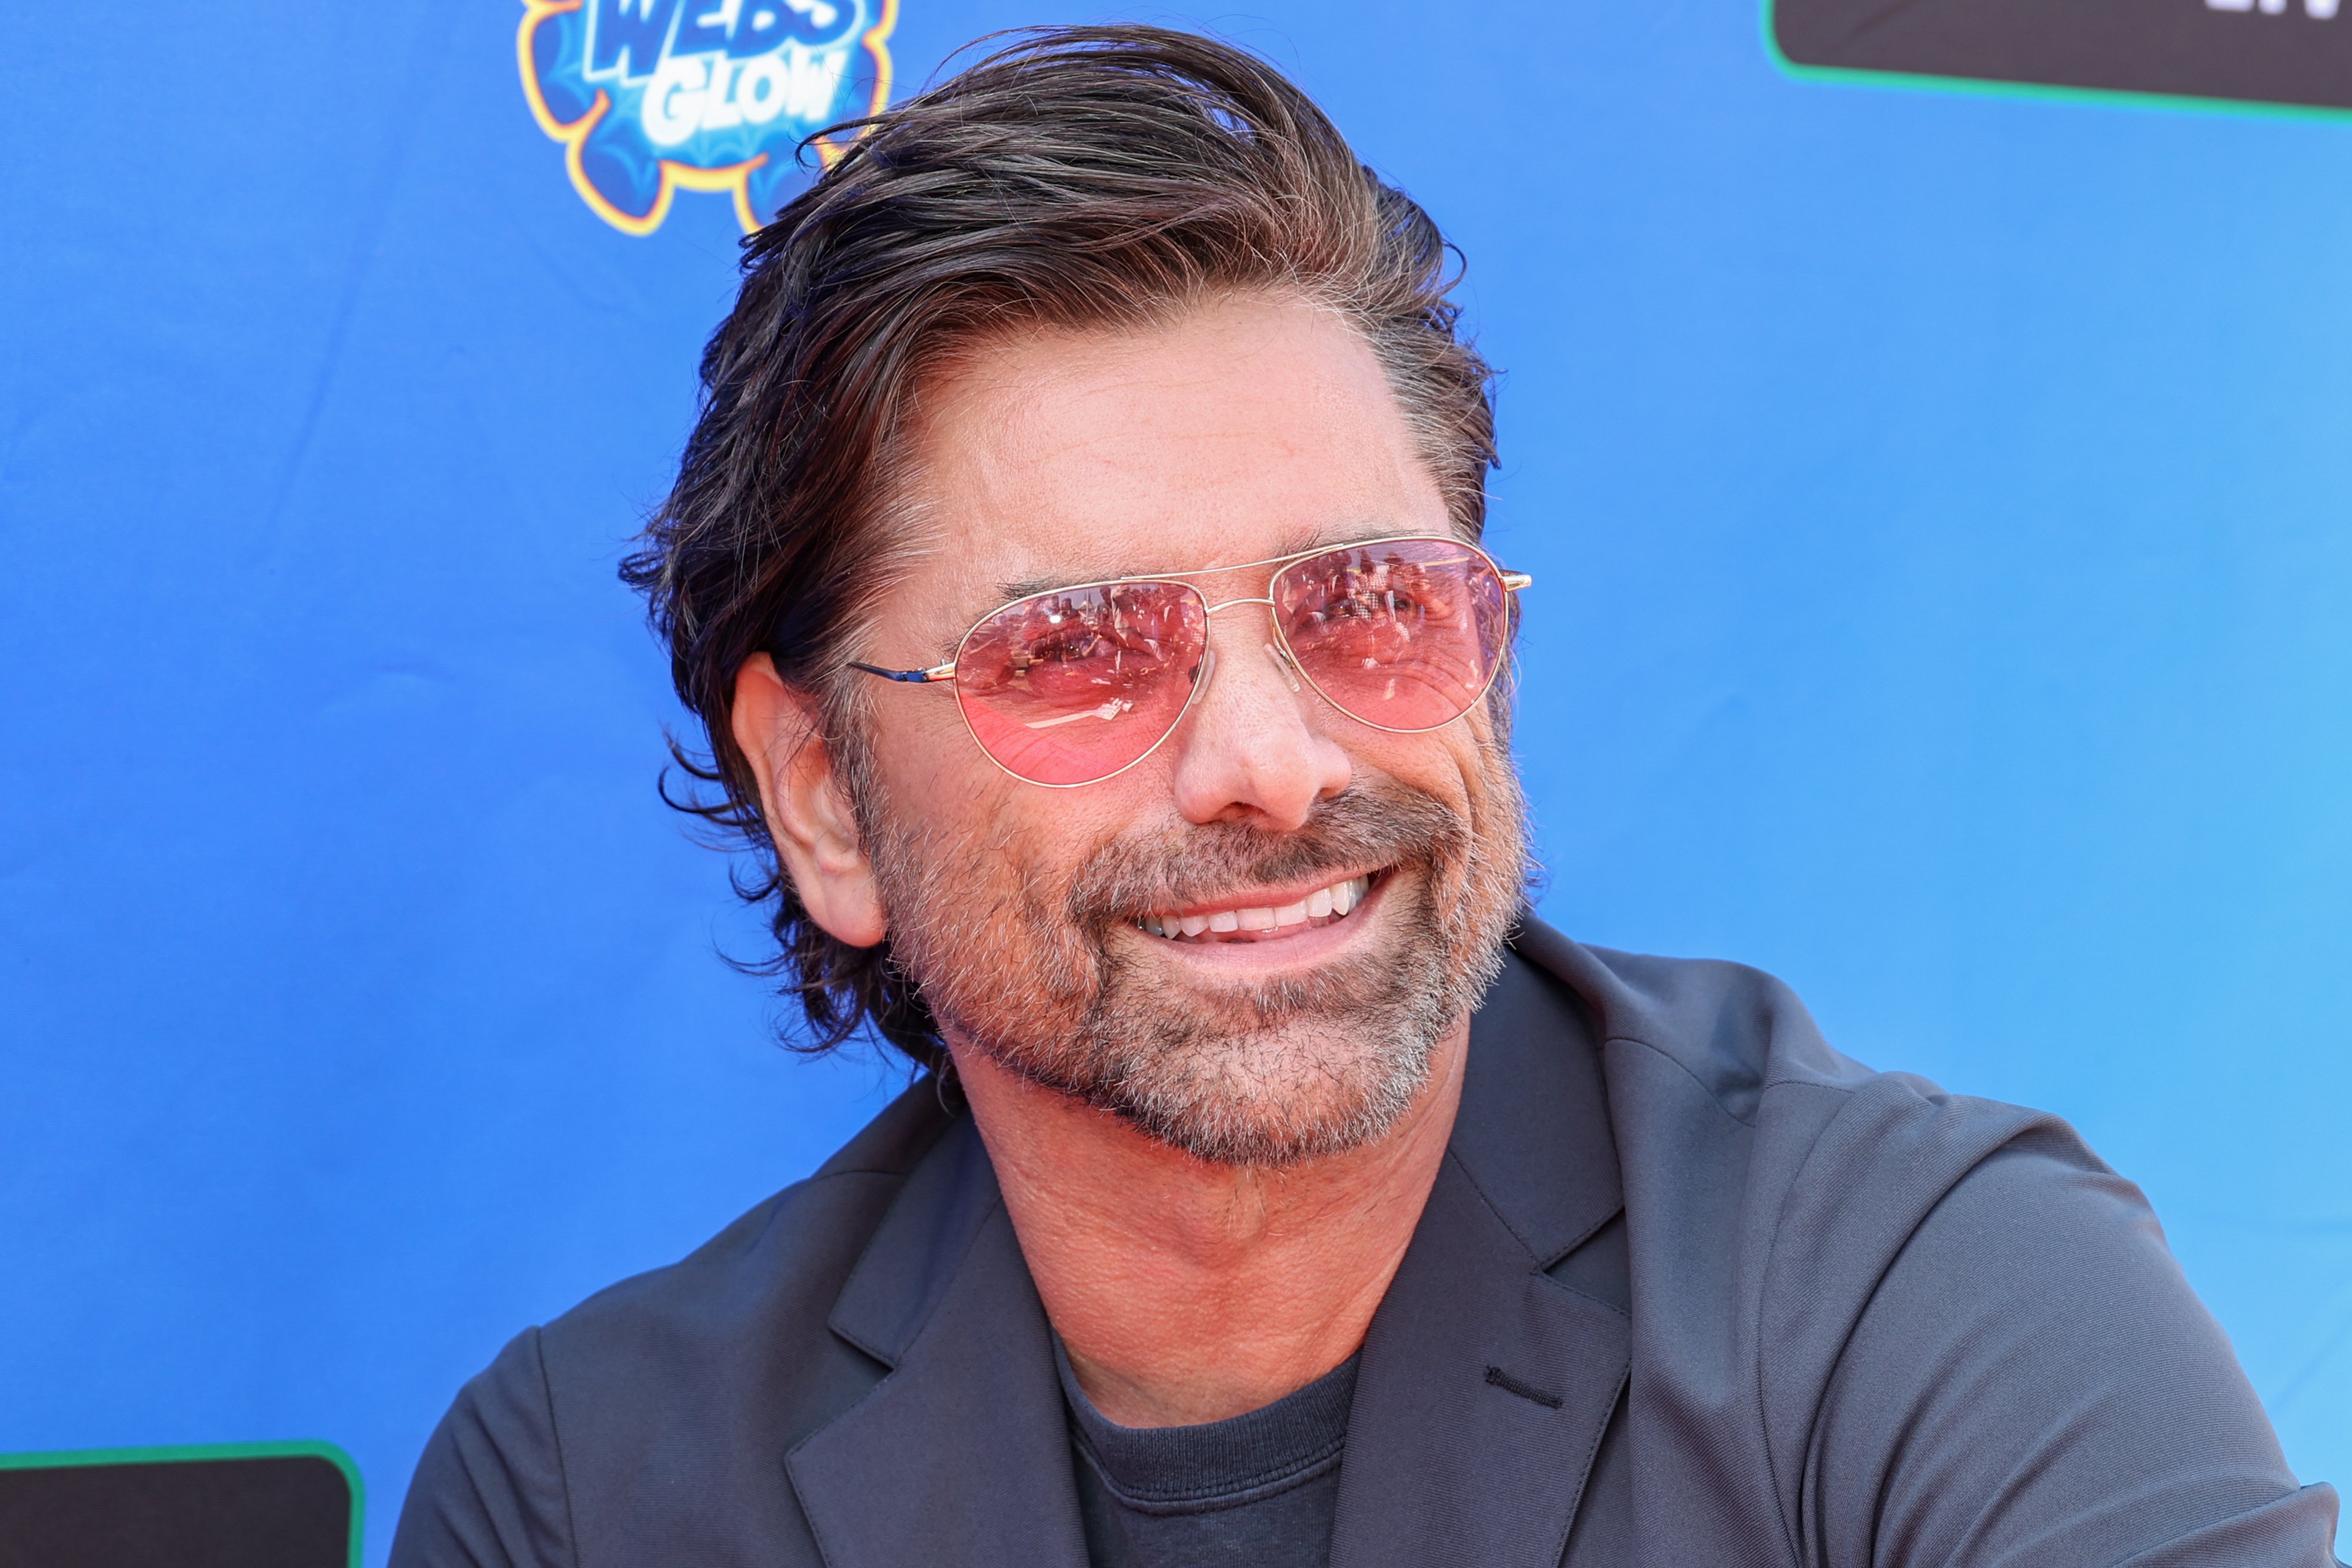 John Stamos at Disney Junior's "Marvel's Spidey and His Amazing Friends" VIP event on August 27, 2022, in Santa Monica, California | Source: Getty Images